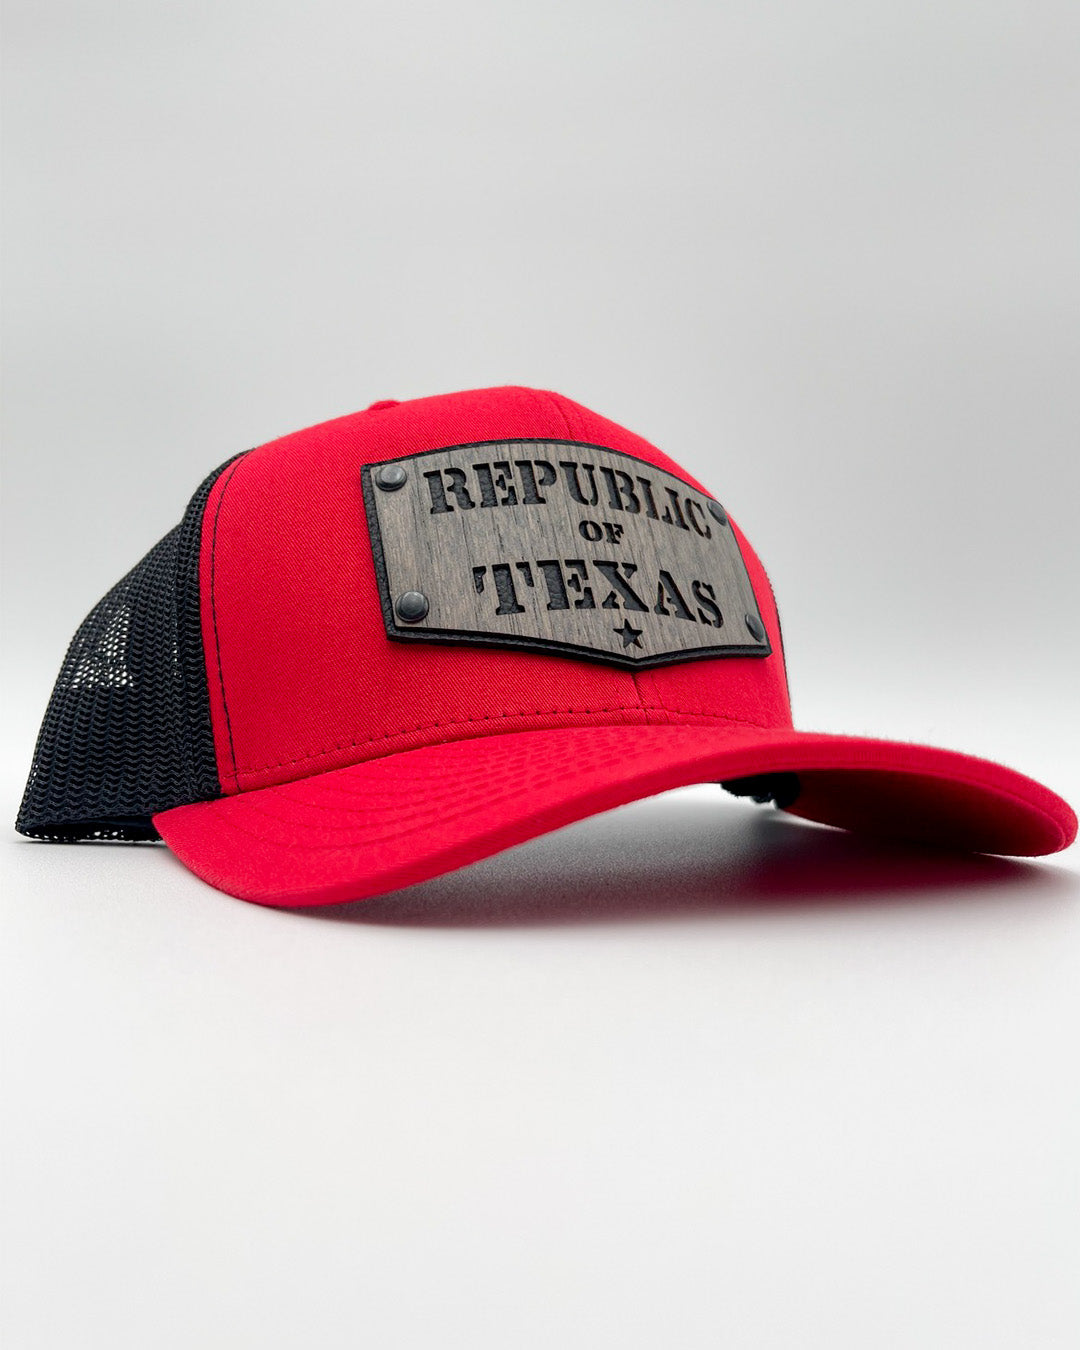 Republic of Texas Customized Hats Promotional Caps Embroidered Hats Yupoong Richardson 112